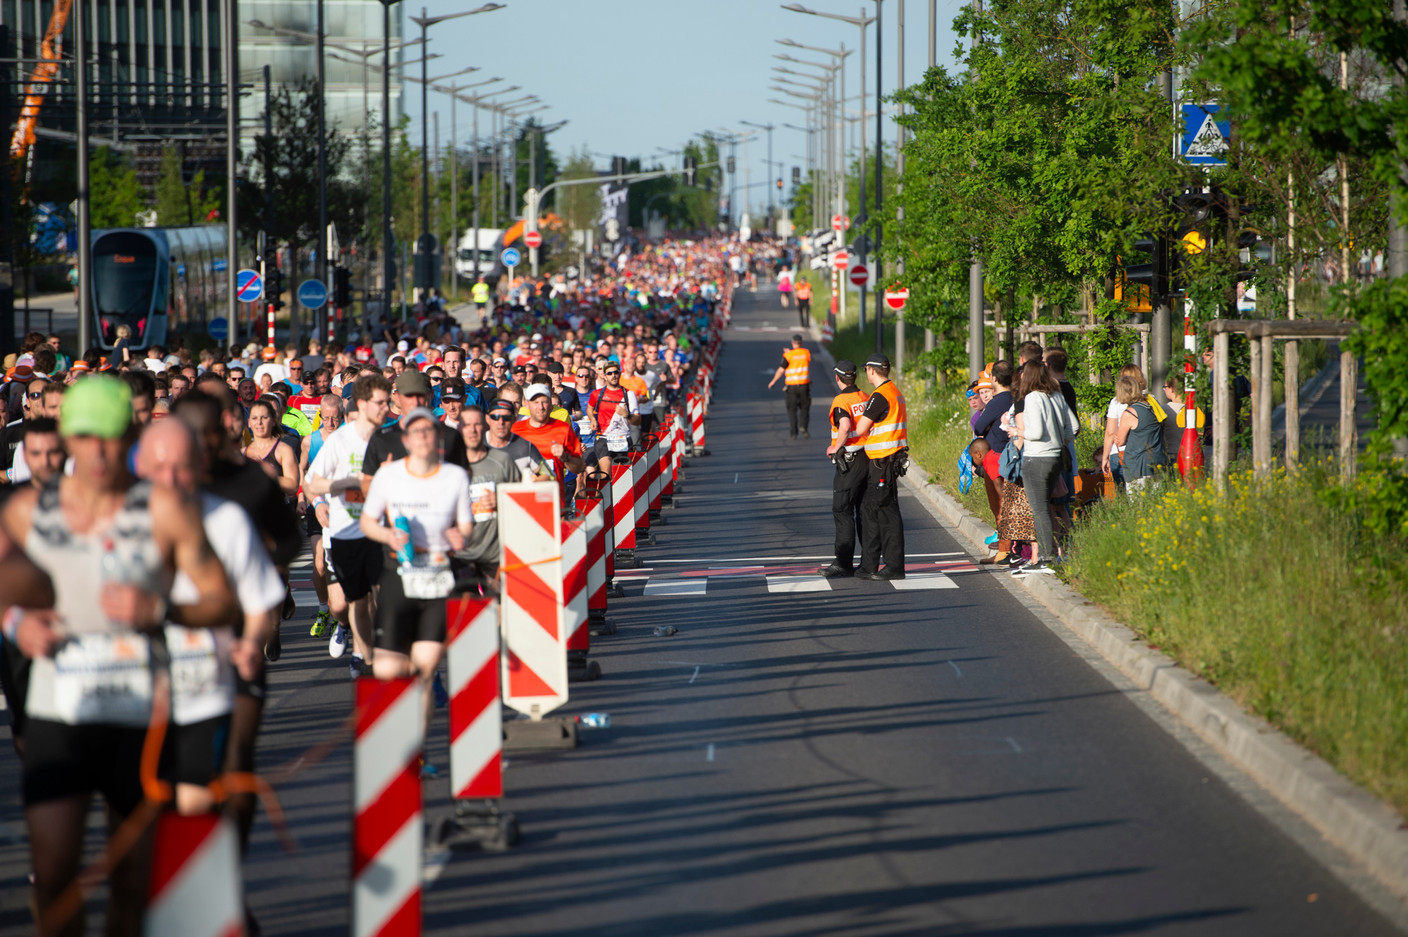 A total of 12,000 runners took part in the event according to ING’s website with an estimated 100,000 spectators cheering on the participants.  Anthony Dehez